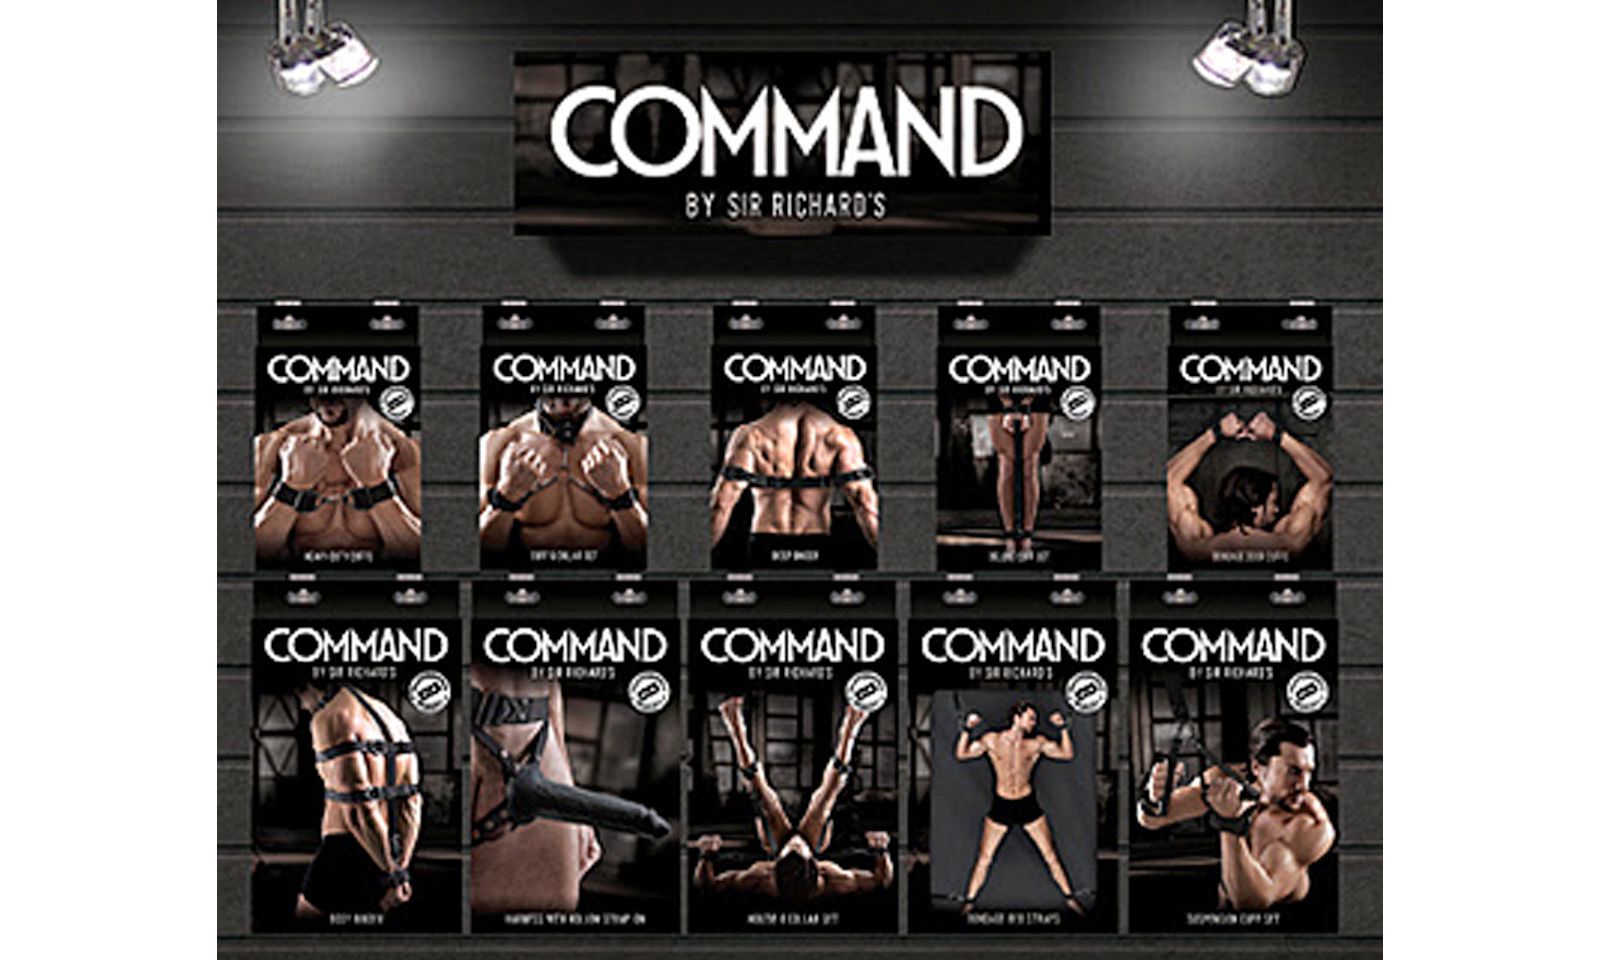 Sir Richard's Has Command Bondage Gear in Stock, Shipping